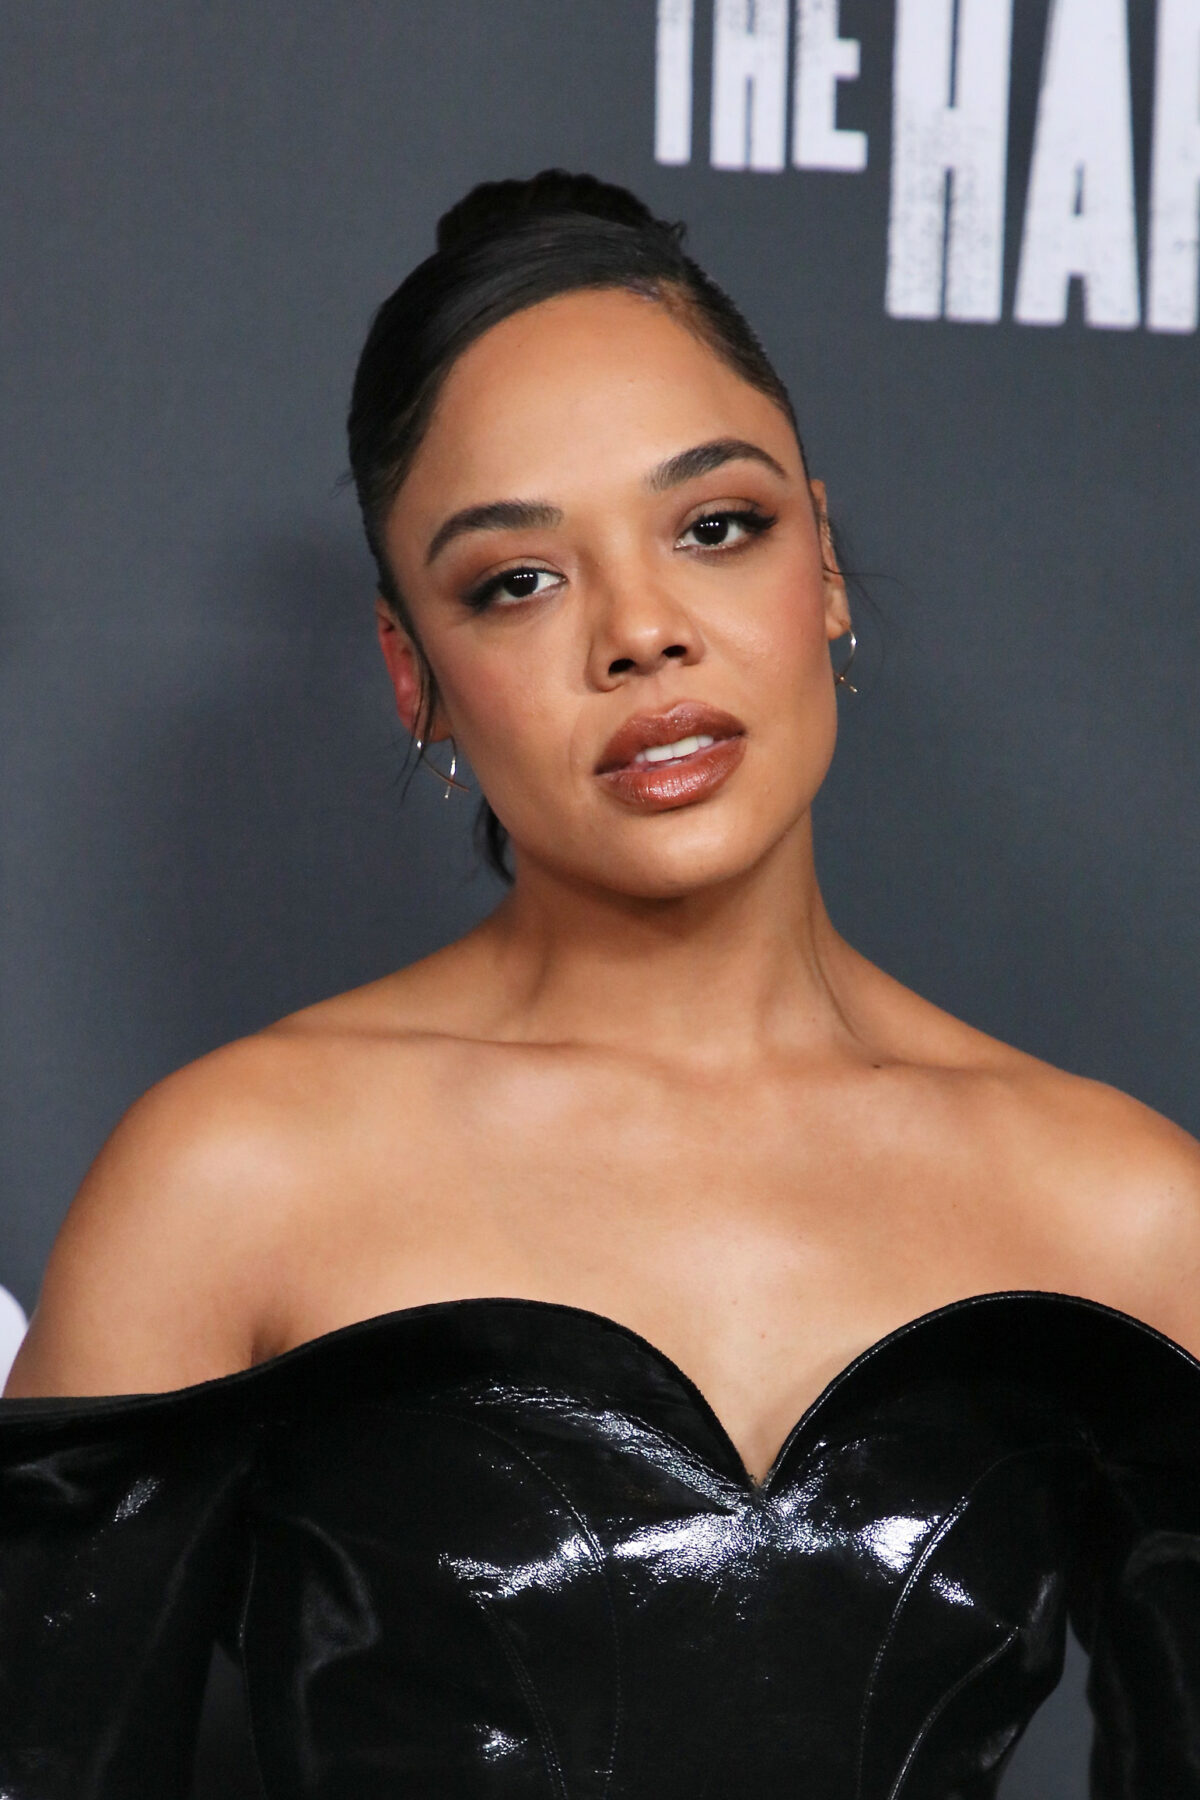 LOS ANGELES, CALIFORNIA - DECEMBER 06: Tessa Thompson attends the 4th Annual Celebration of Black Cinema and Television presented by The Critics Choice Association at Fairmont Century Plaza on December 06, 2021 in Los Angeles, California.